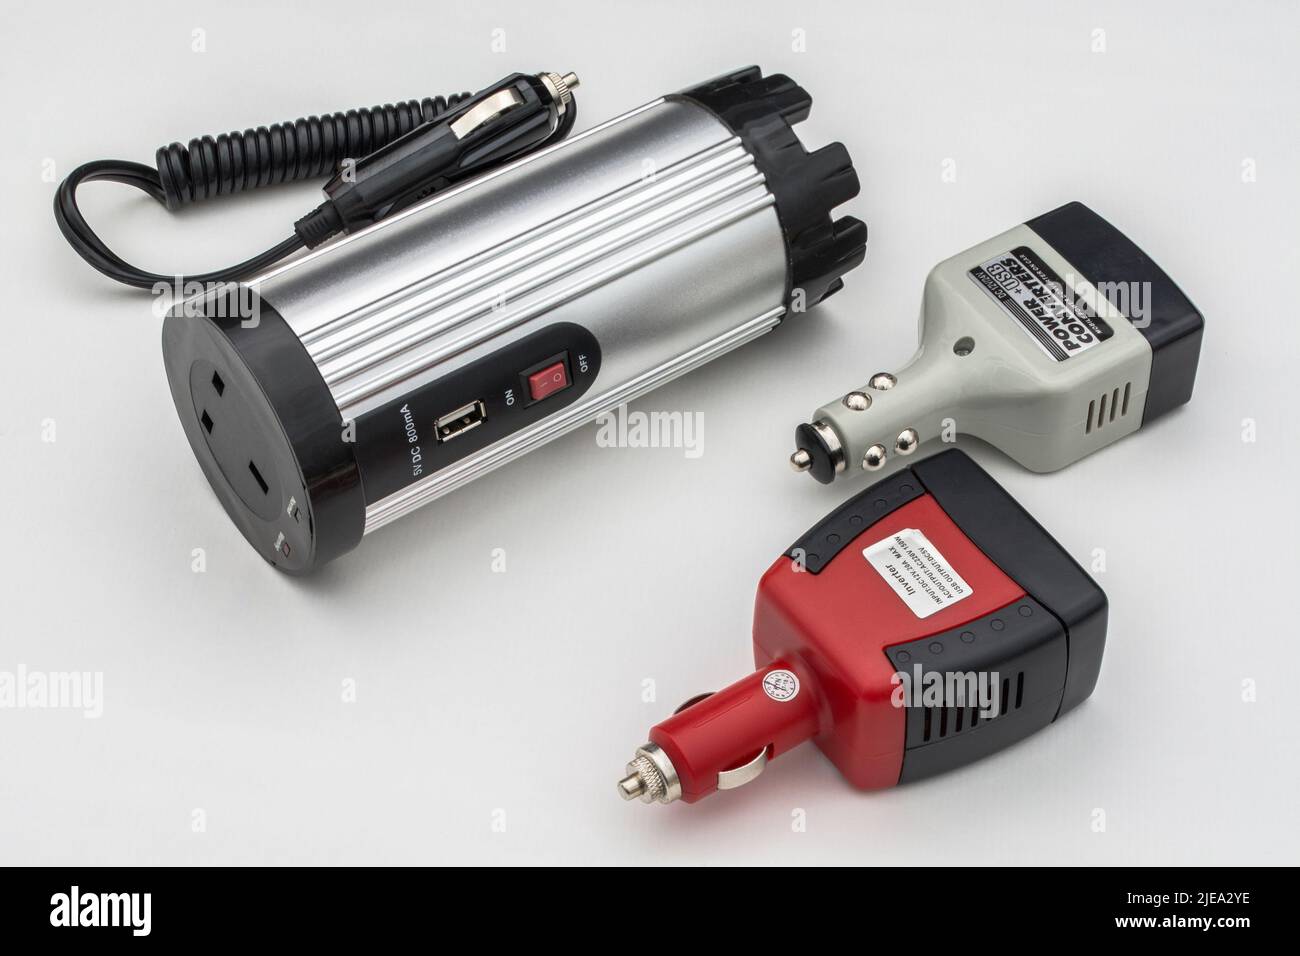 B&Q 12v car cigarette lighter 150w / Watt DC to AC inverter (L/H) and two small lighter inverters. Have 3-pin AC power socket + USB charging socket. Stock Photo